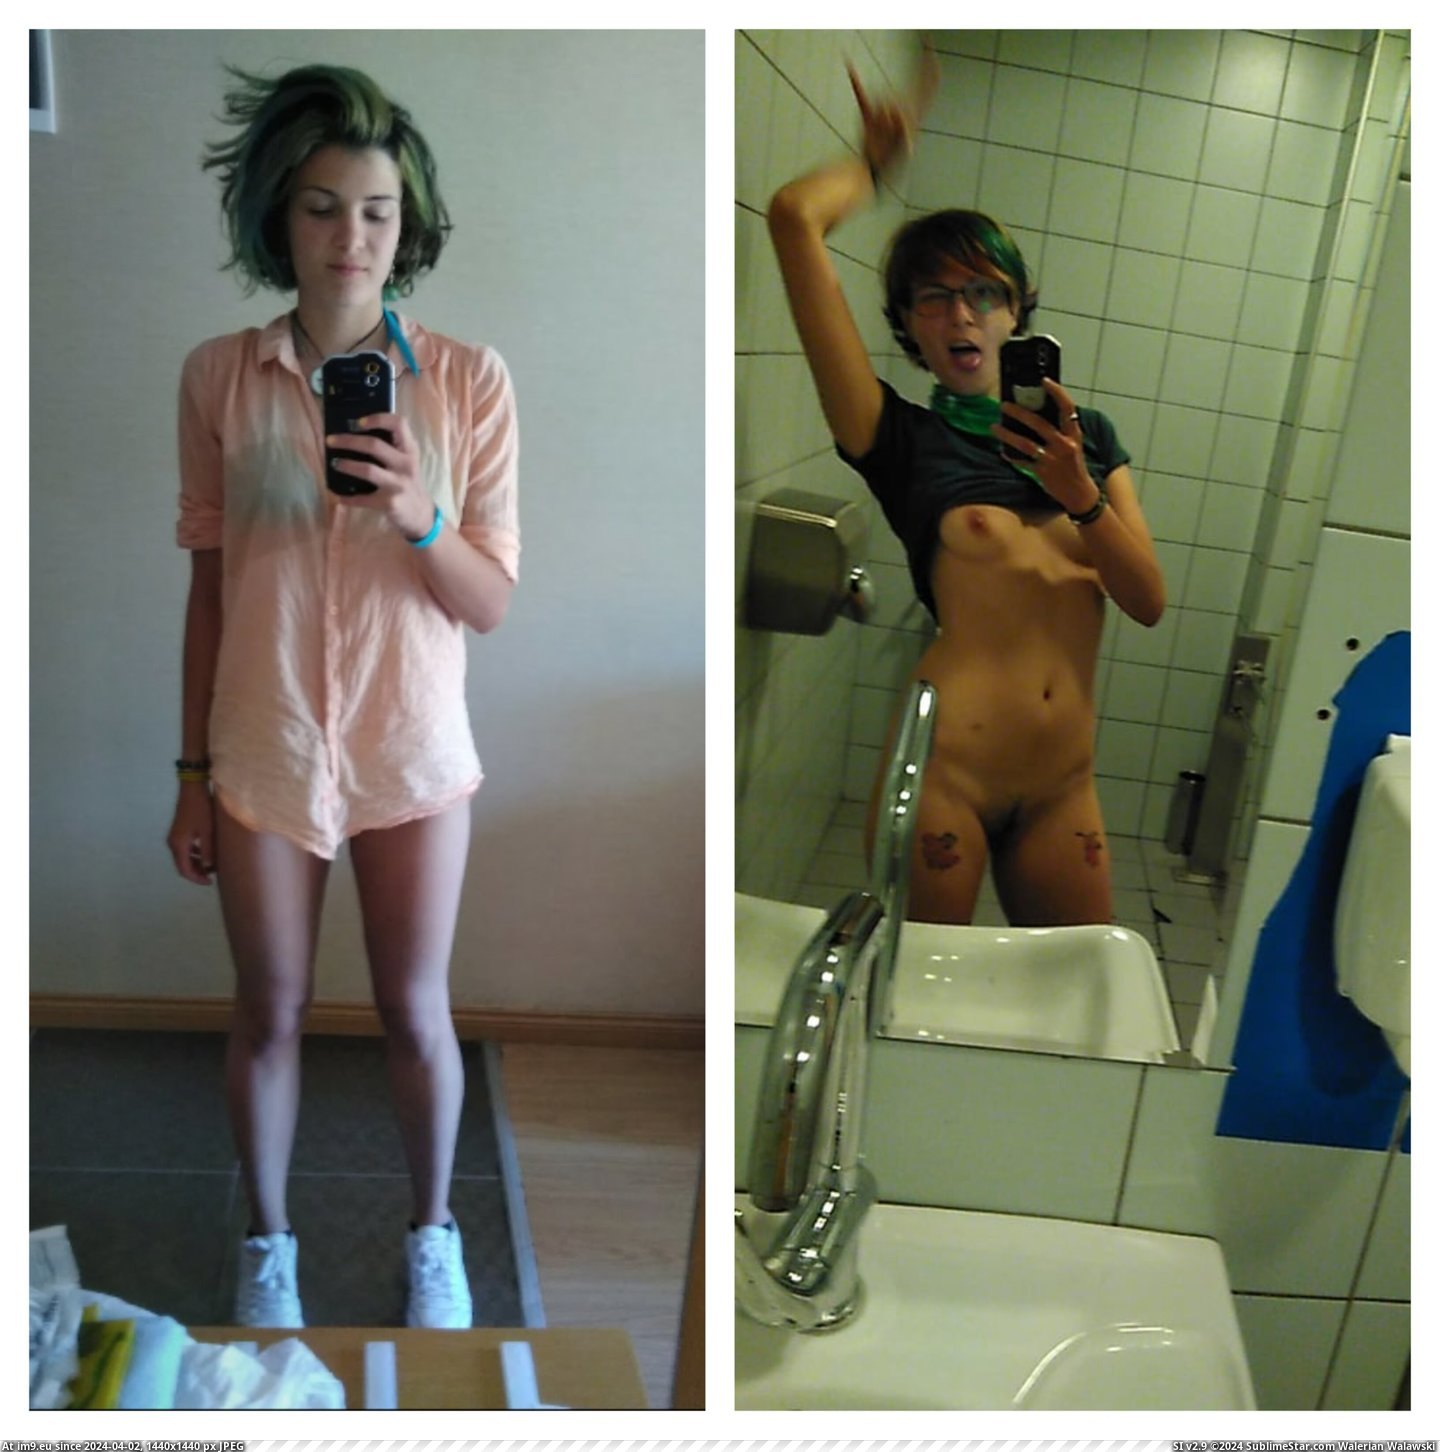 #Tits #Pussy #Dressed #Collage #Onoff #Clothed #Undressed #Unclothed Valentinaon_off Pic. (Bild von album Instant Upload))